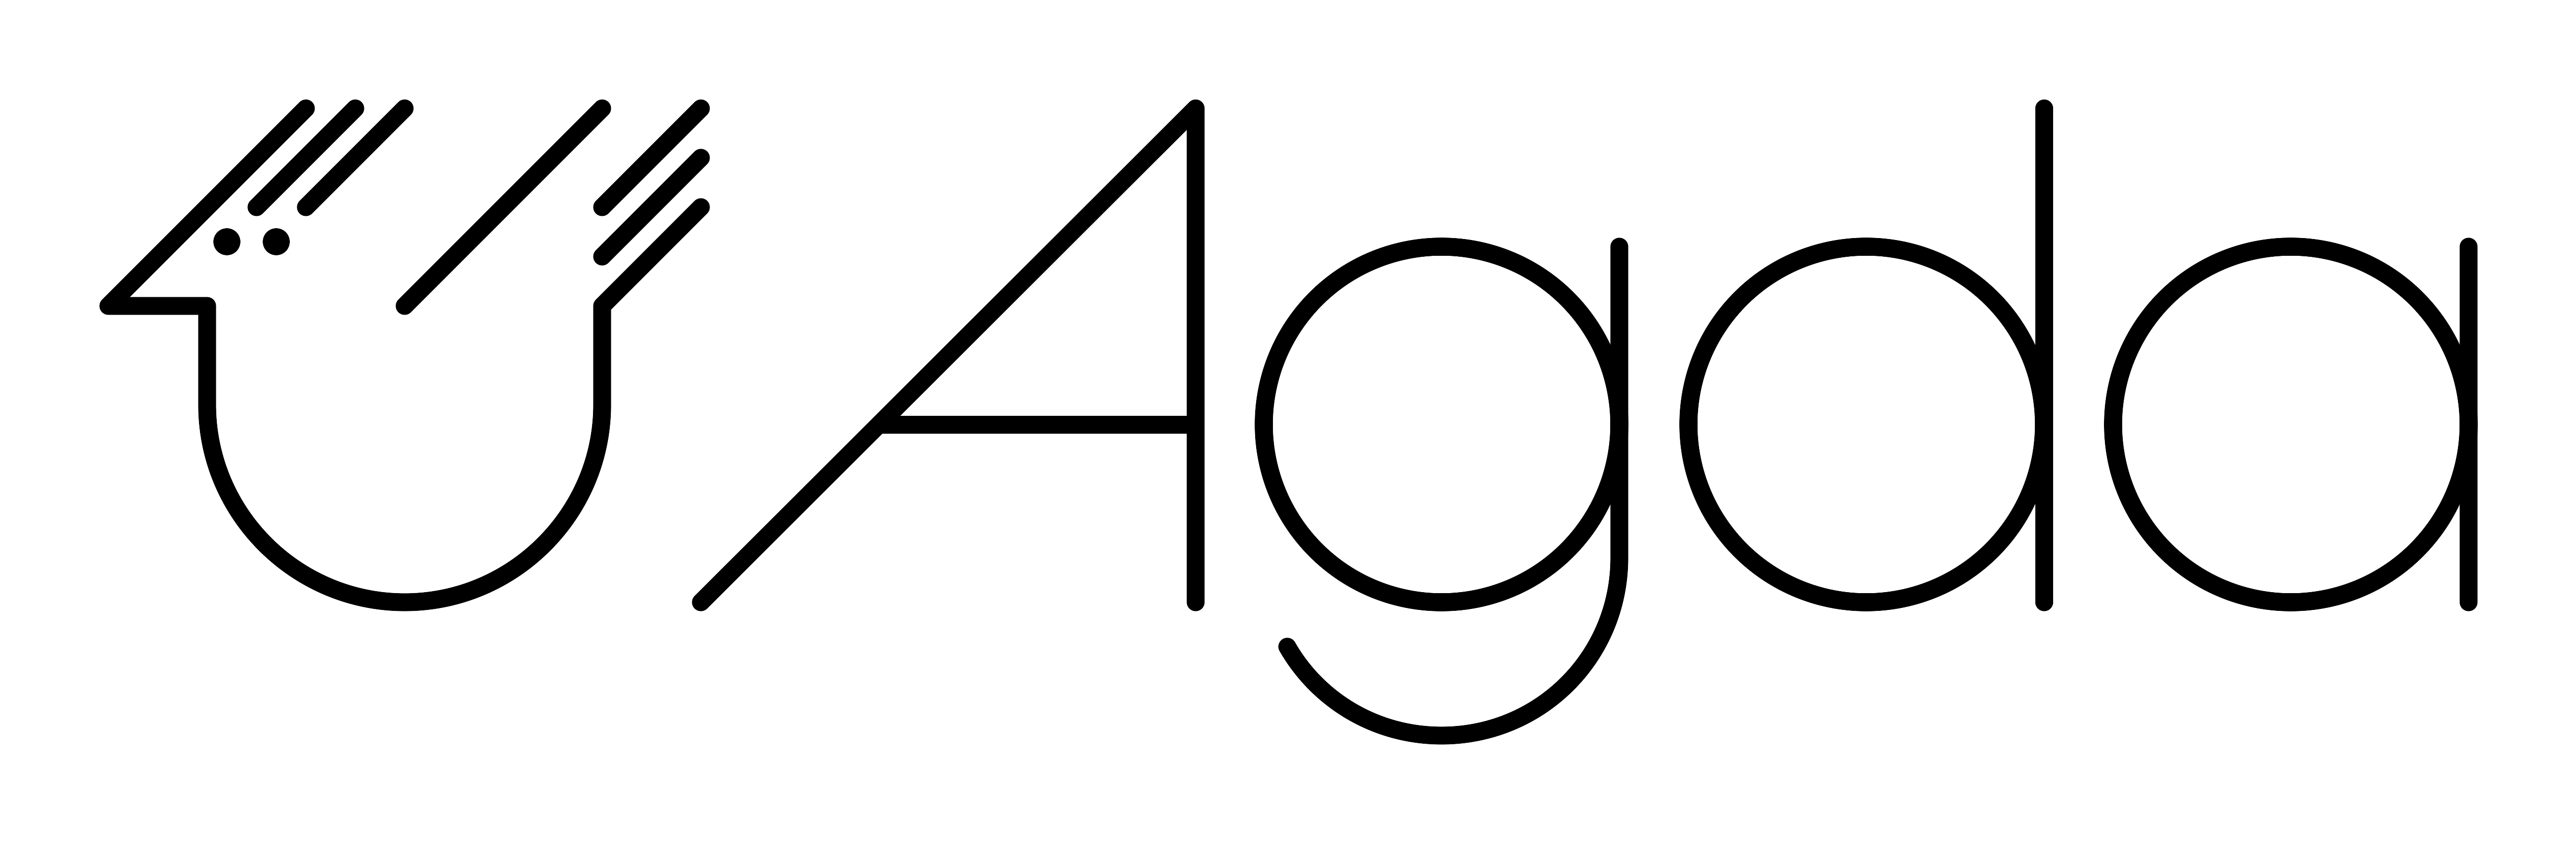 The official Agda logo